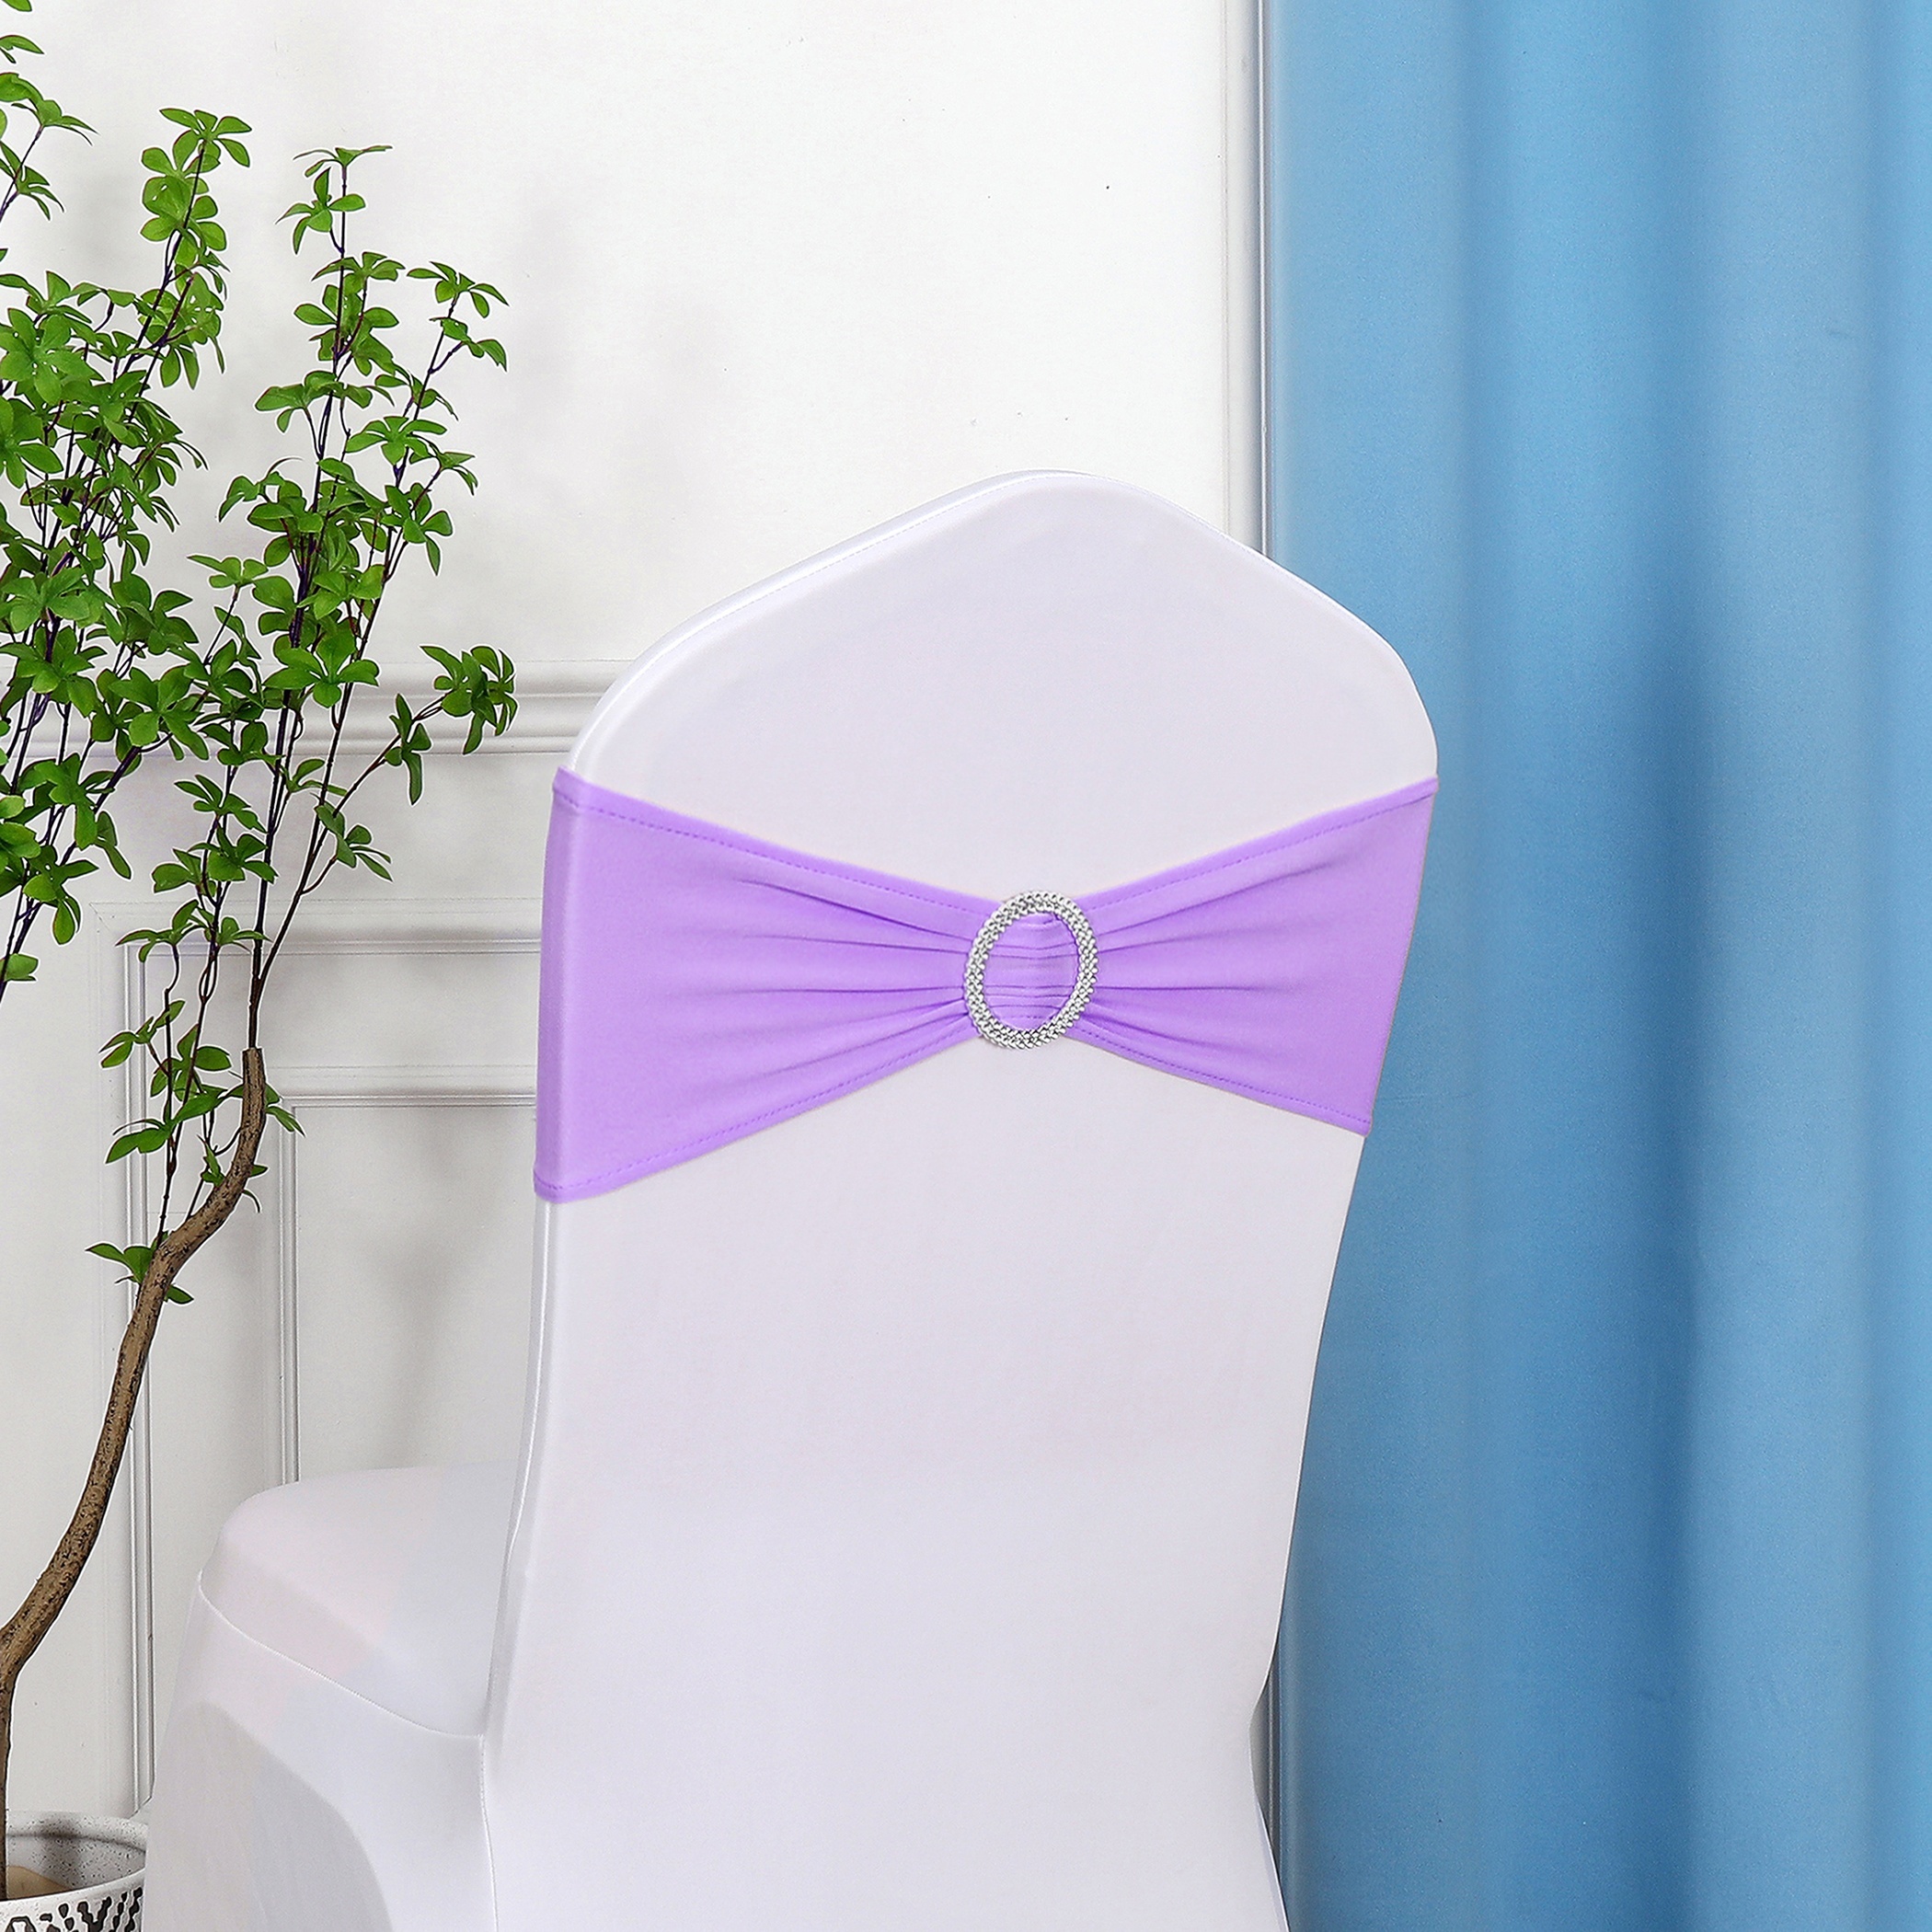 

20pcs, Spandex Chair With Bow, Universal Elastic Chair Tie, Suitable For Wedding Party Ceremony Reception Banquet Decoration (purple)